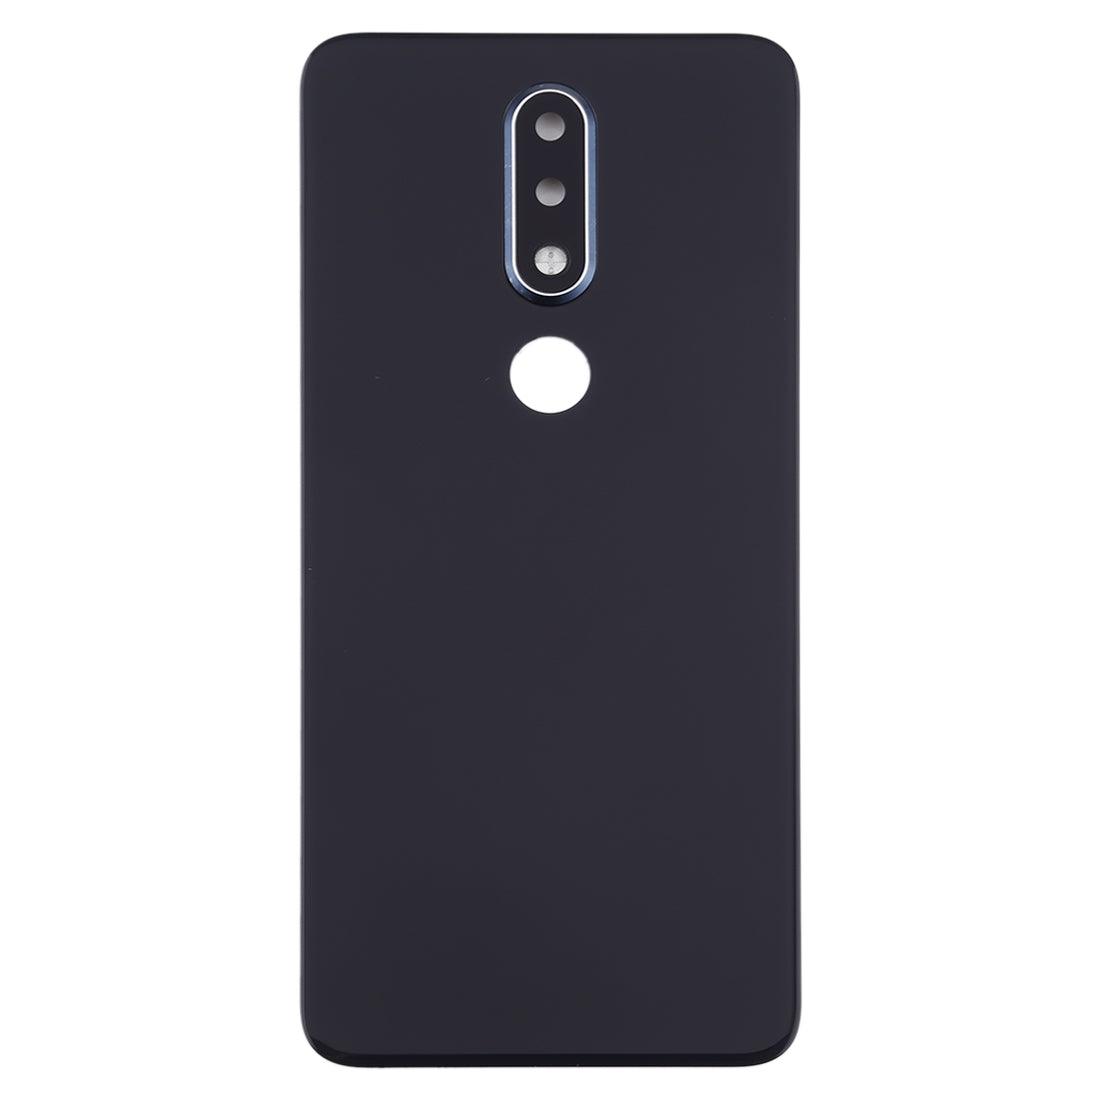 Back Glass Panel Housing Body for Nokia 6.1 Plus Blue with Camera Lens